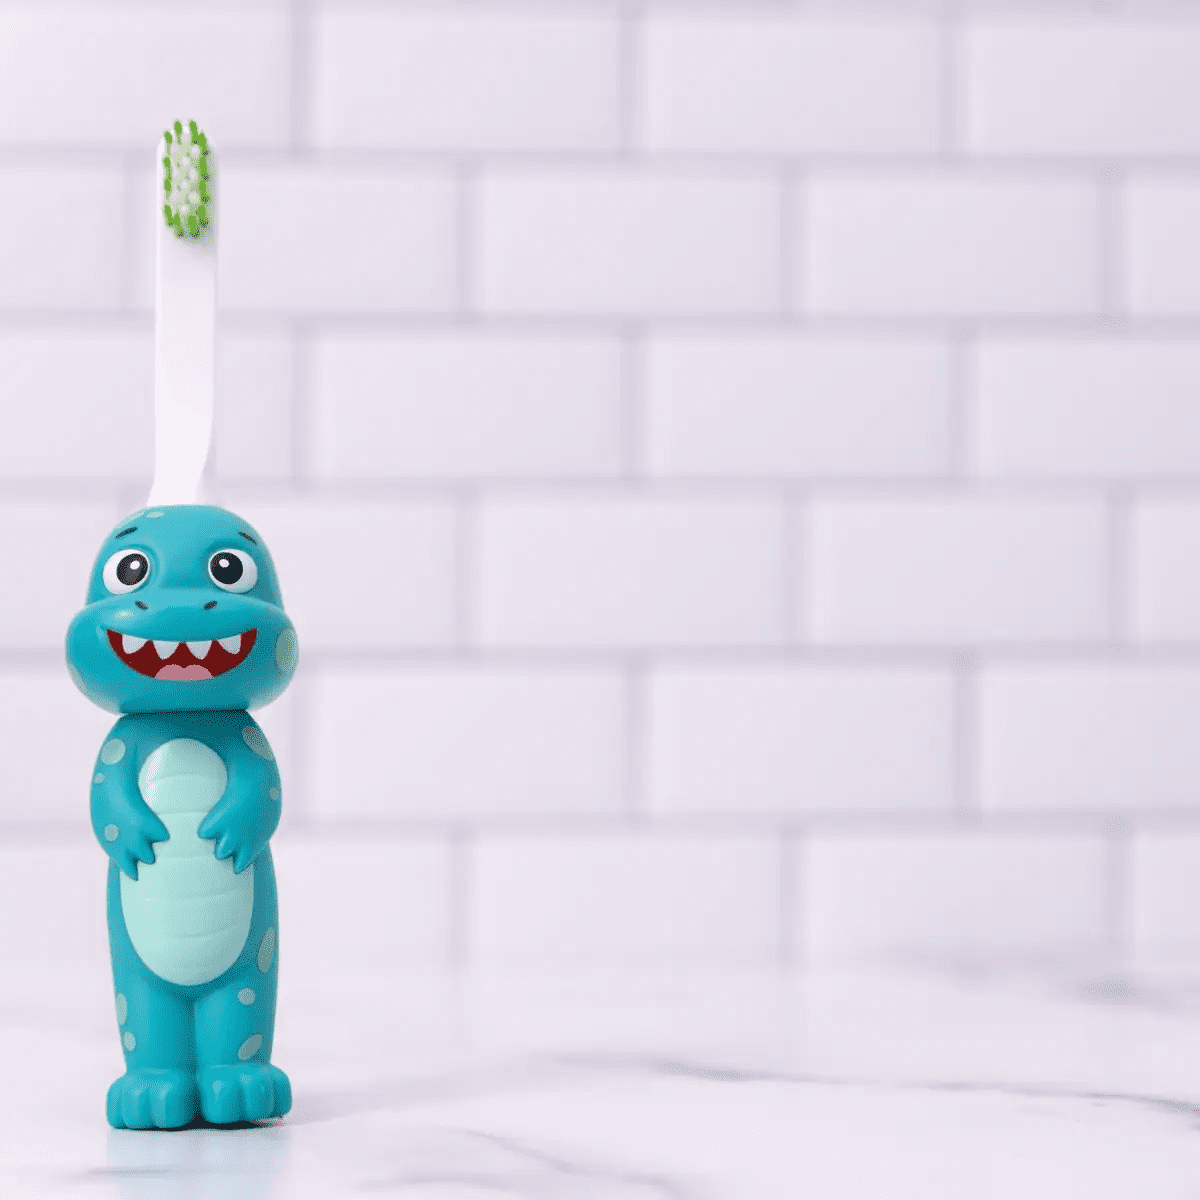 A Brushy the Brushasaurus toothbrush designed as a dinosaur toy